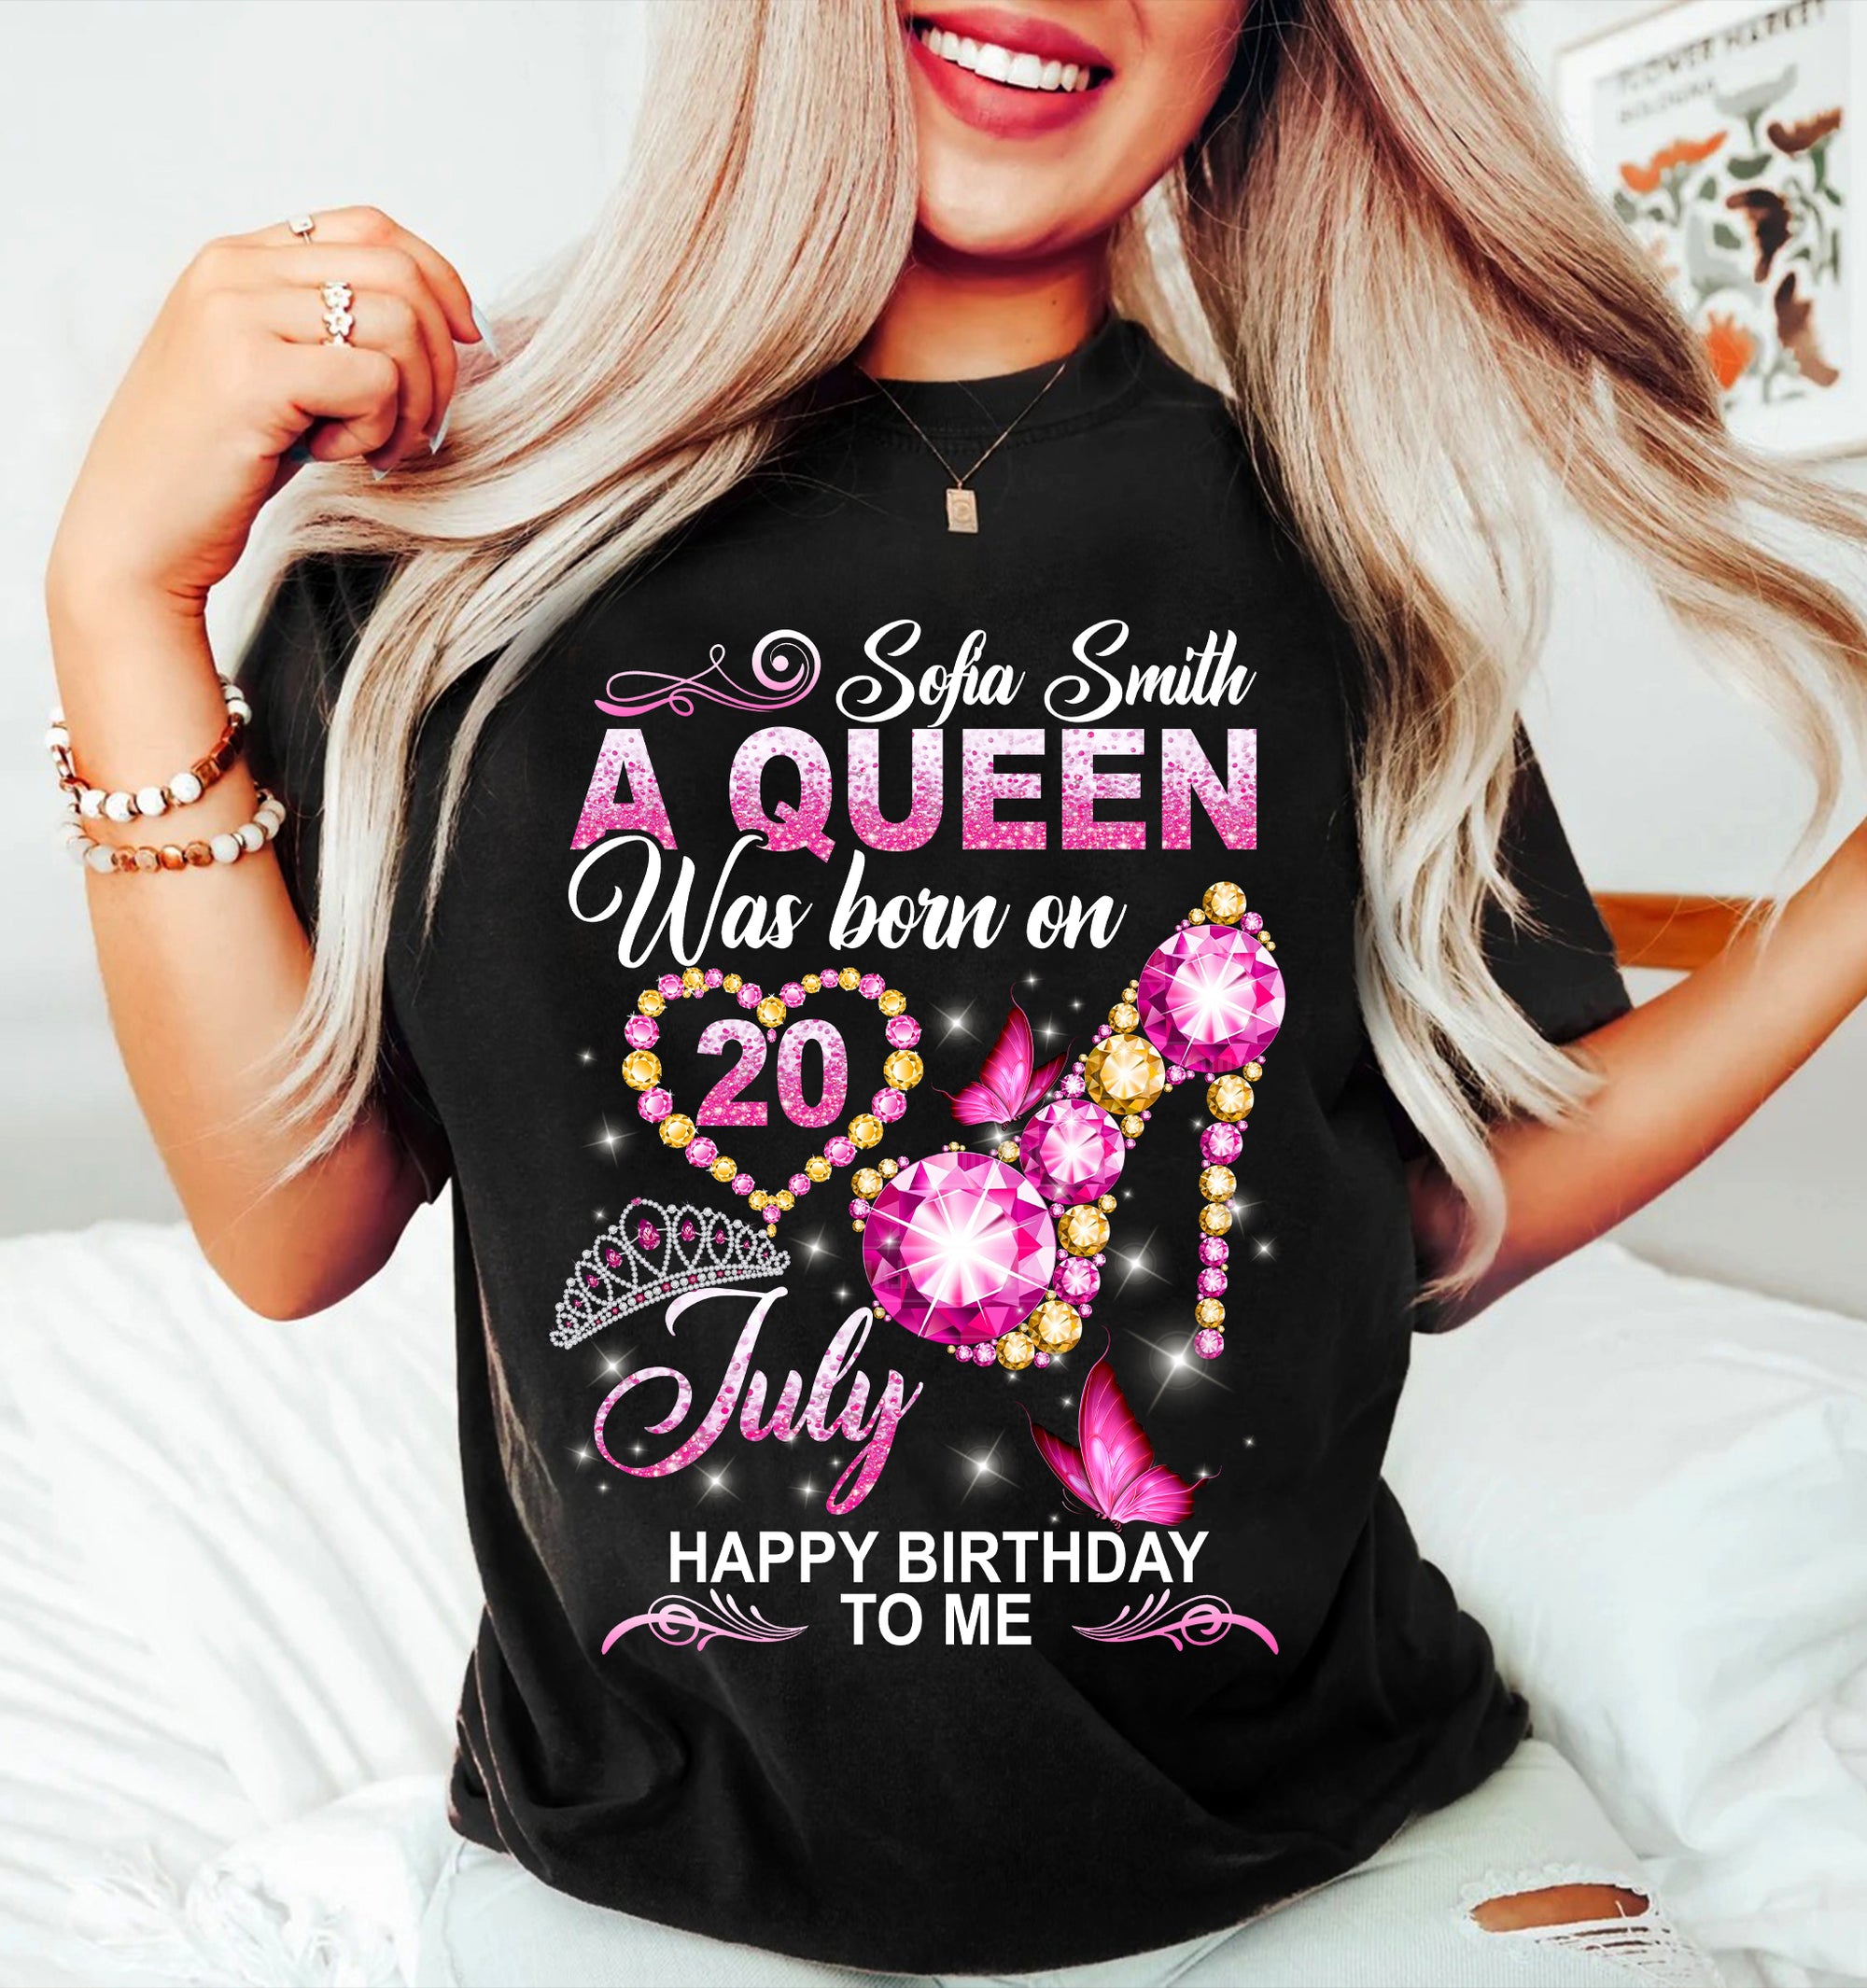 A Queen Was Born On July - Happy Birthday To Me - Personalized T-Shirt, Gift For Birthday